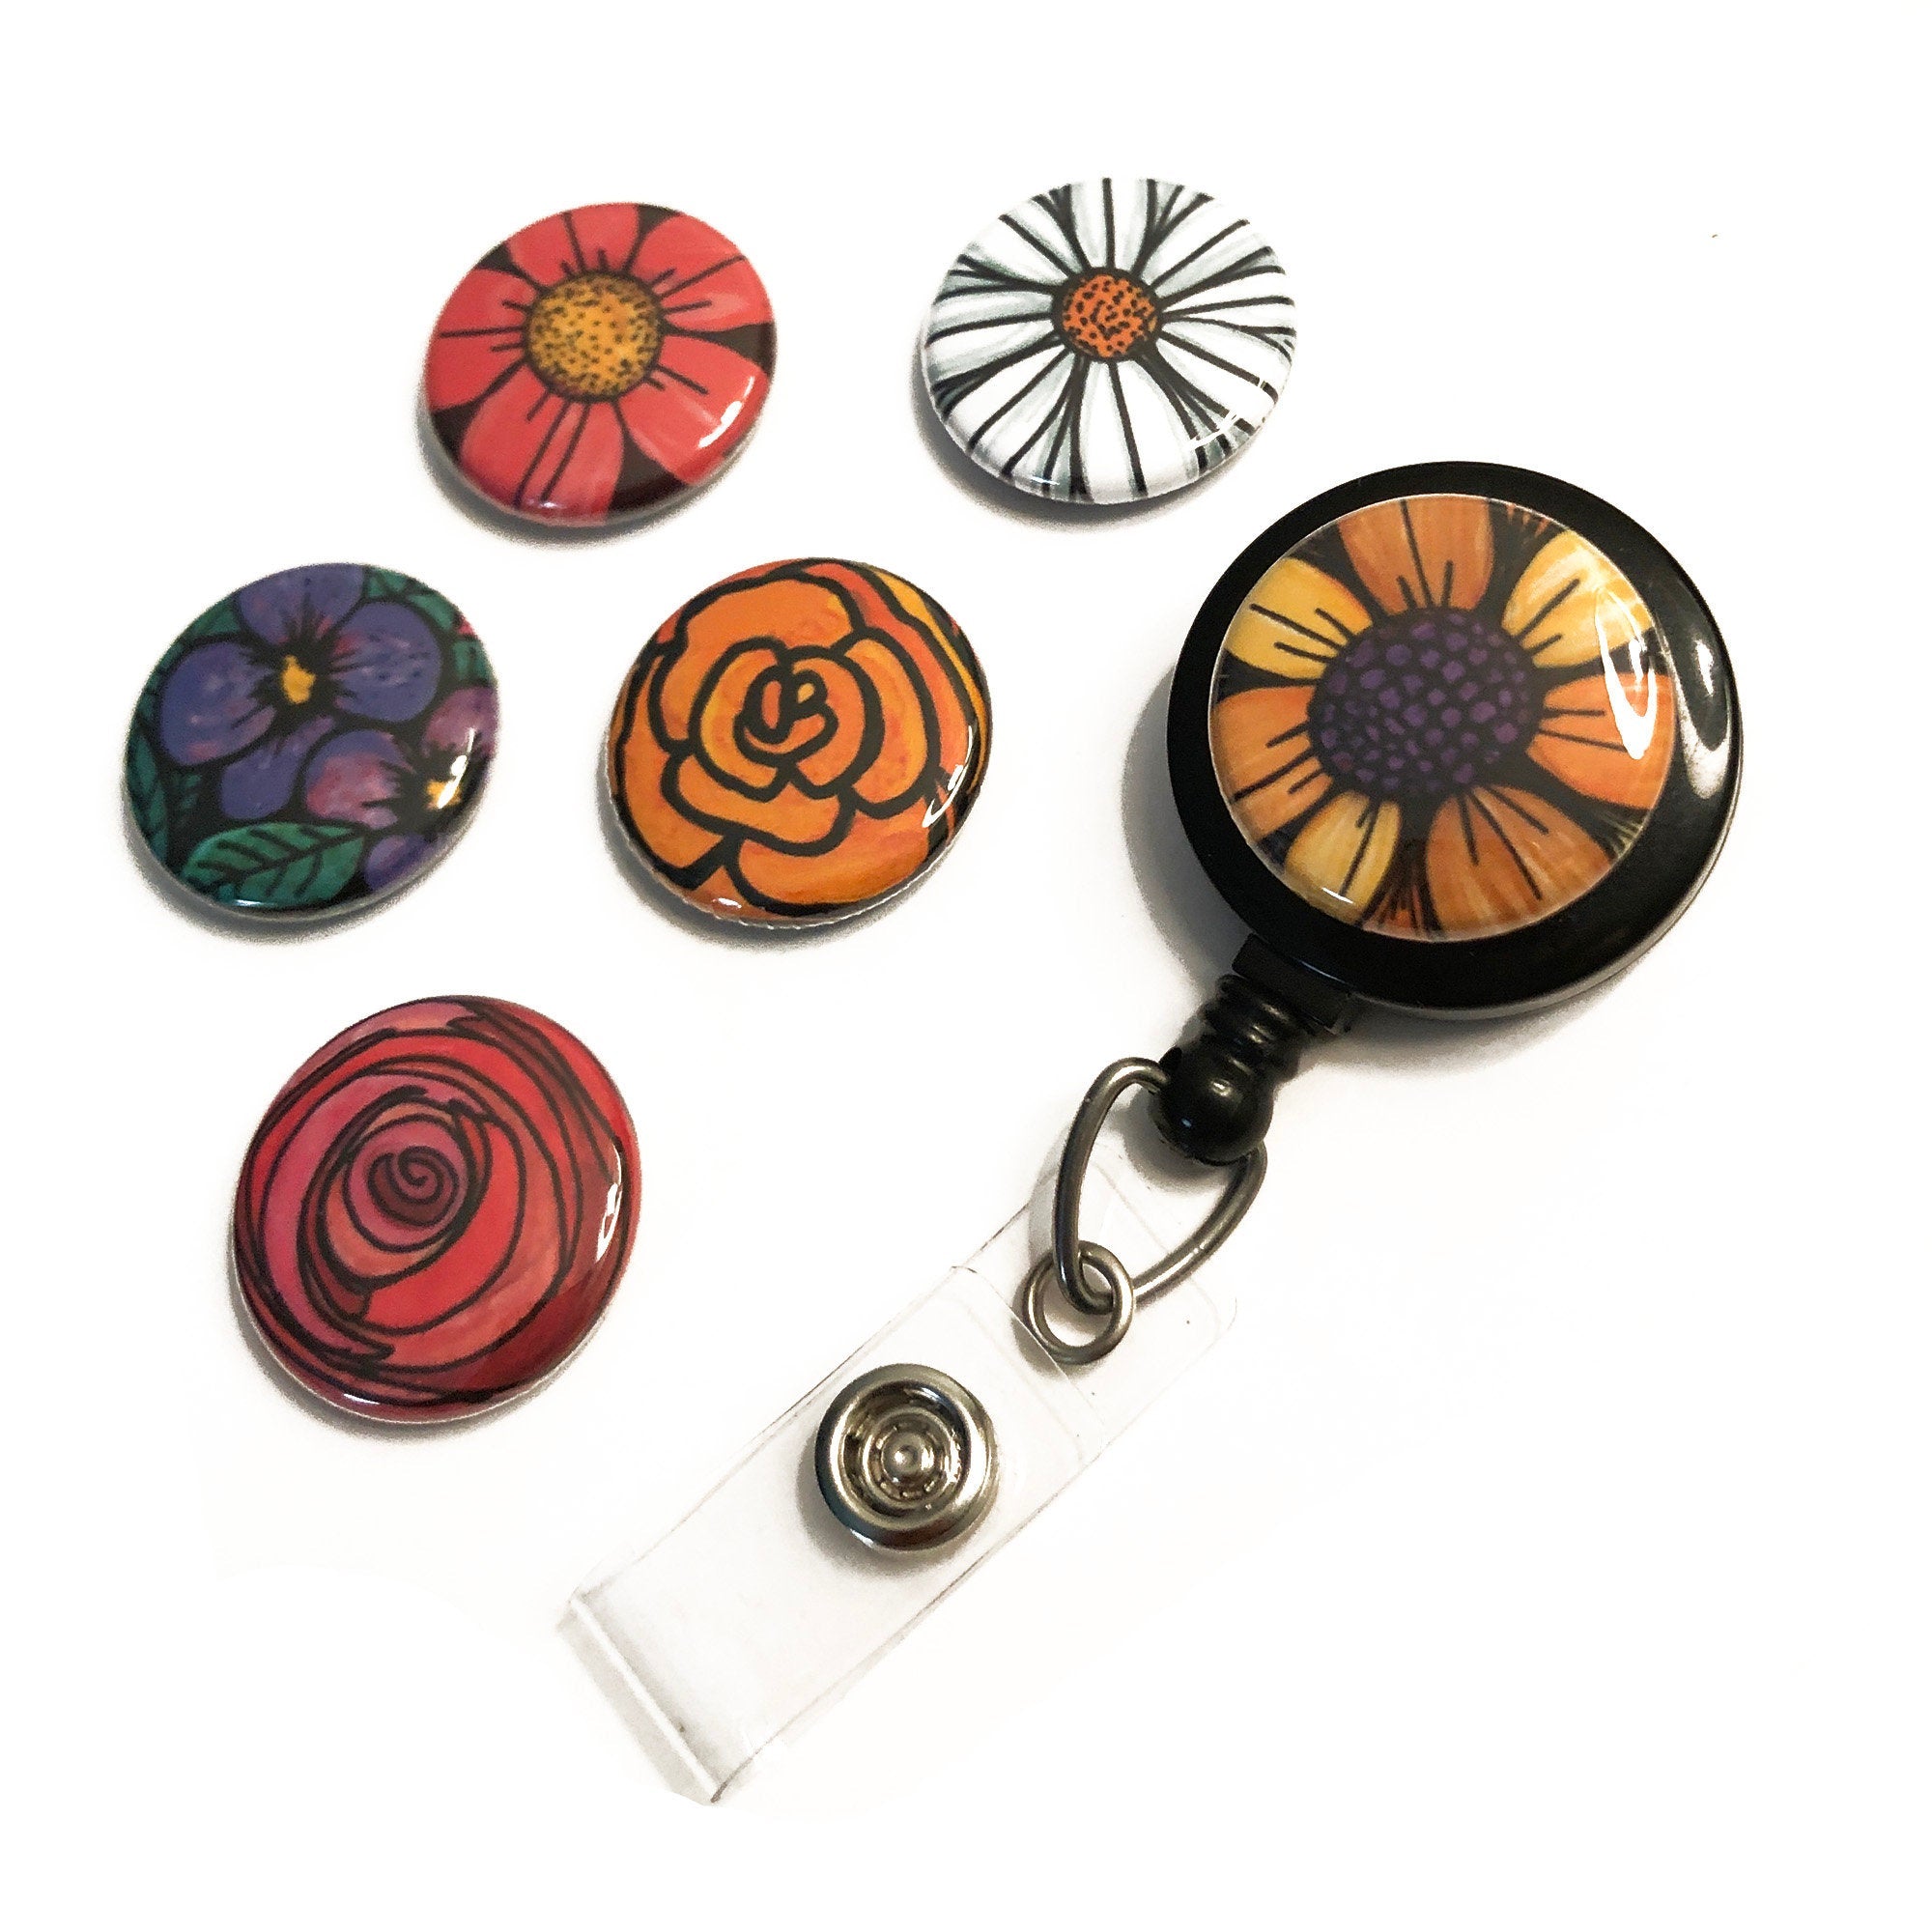 Bloom Where You Are Planted Ribbon Lanyard ID Holder with Badge Reels (Regular)